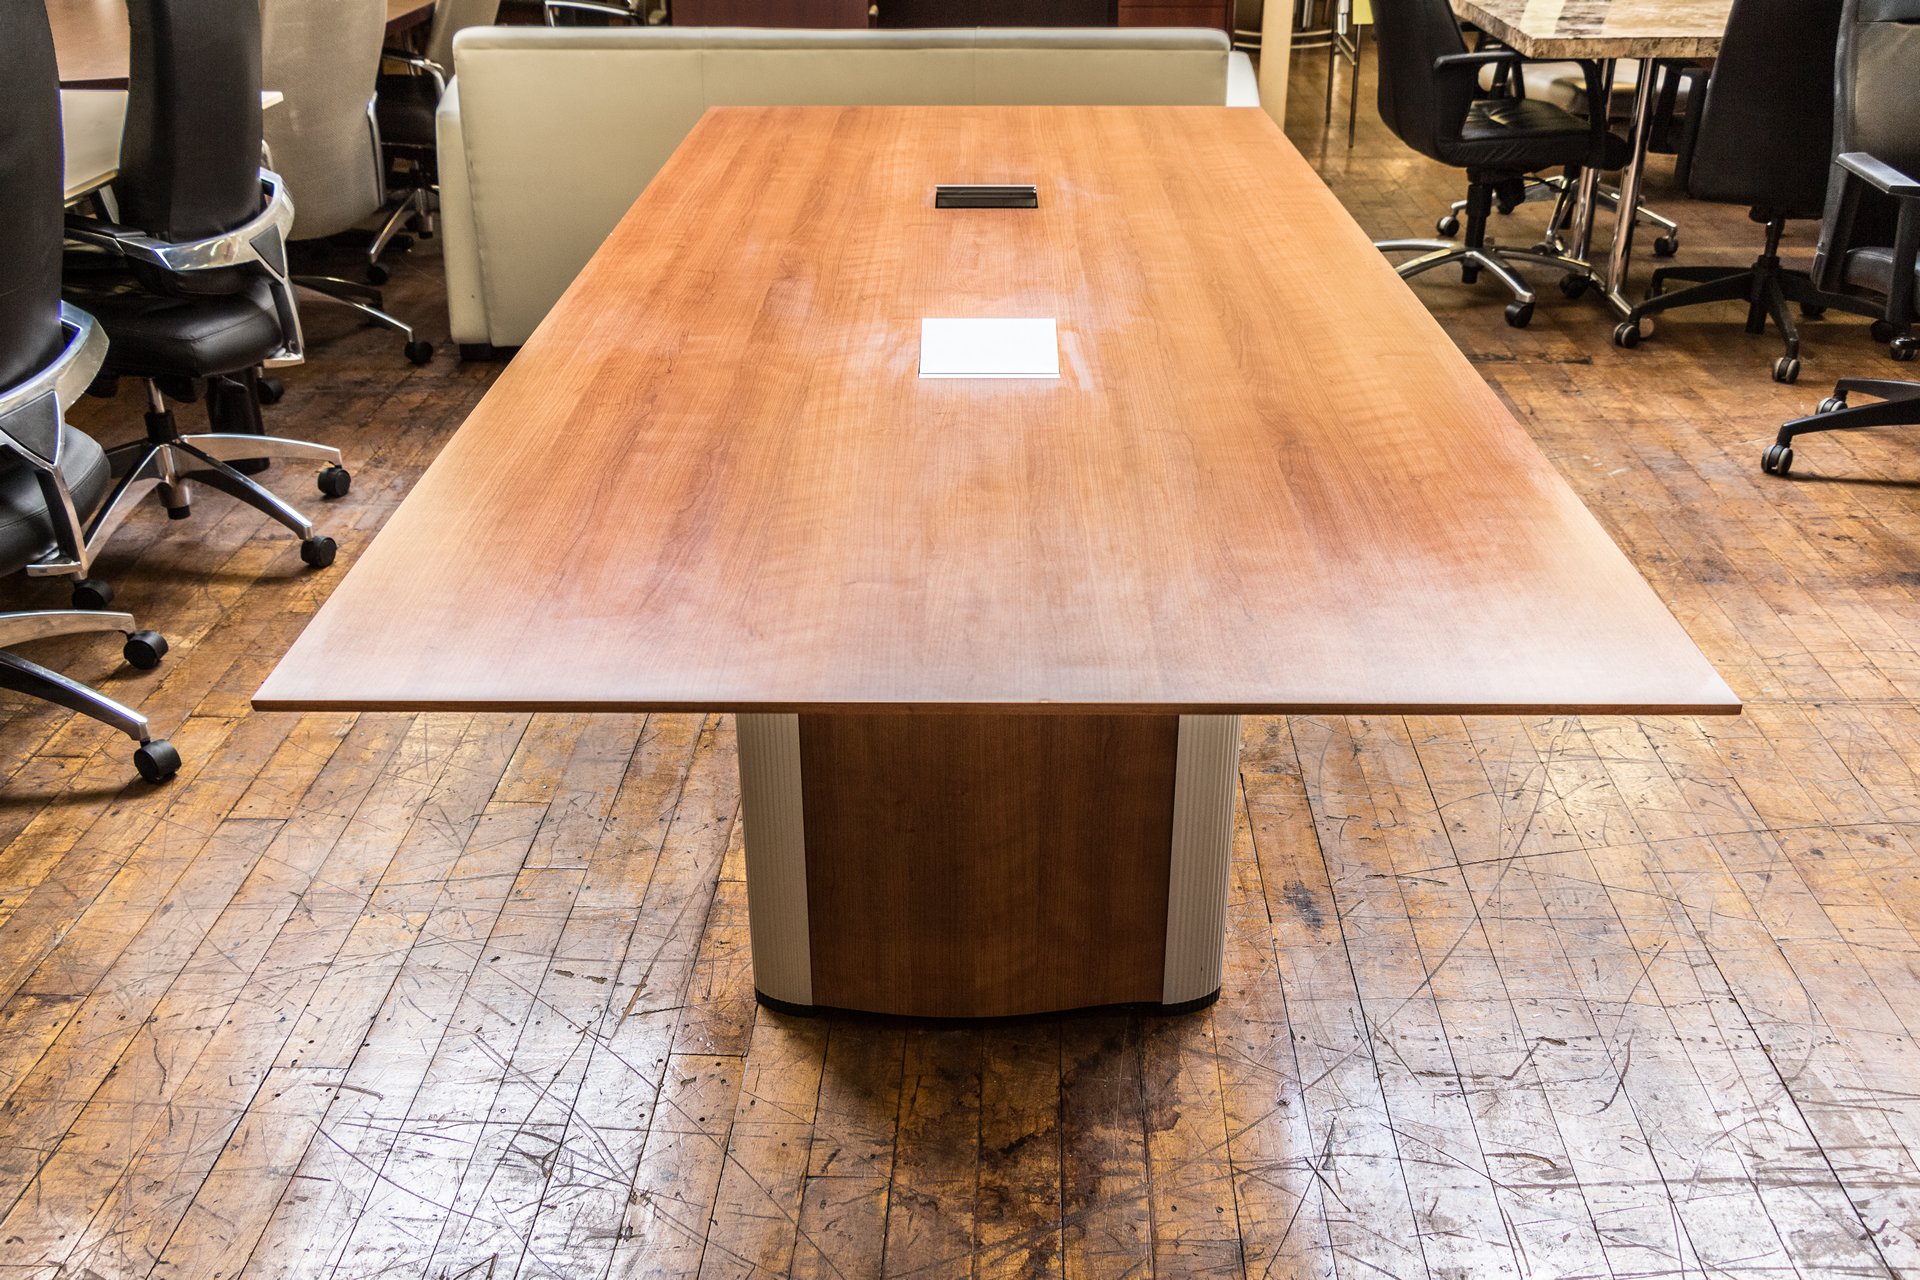 peartreeofficefurniture_peartreeofficefurniture_peartreeofficefurniture_nienkamper-vox-8-x-3-5-cherry-laminate-tapered-edge-conference-table-1.jpg